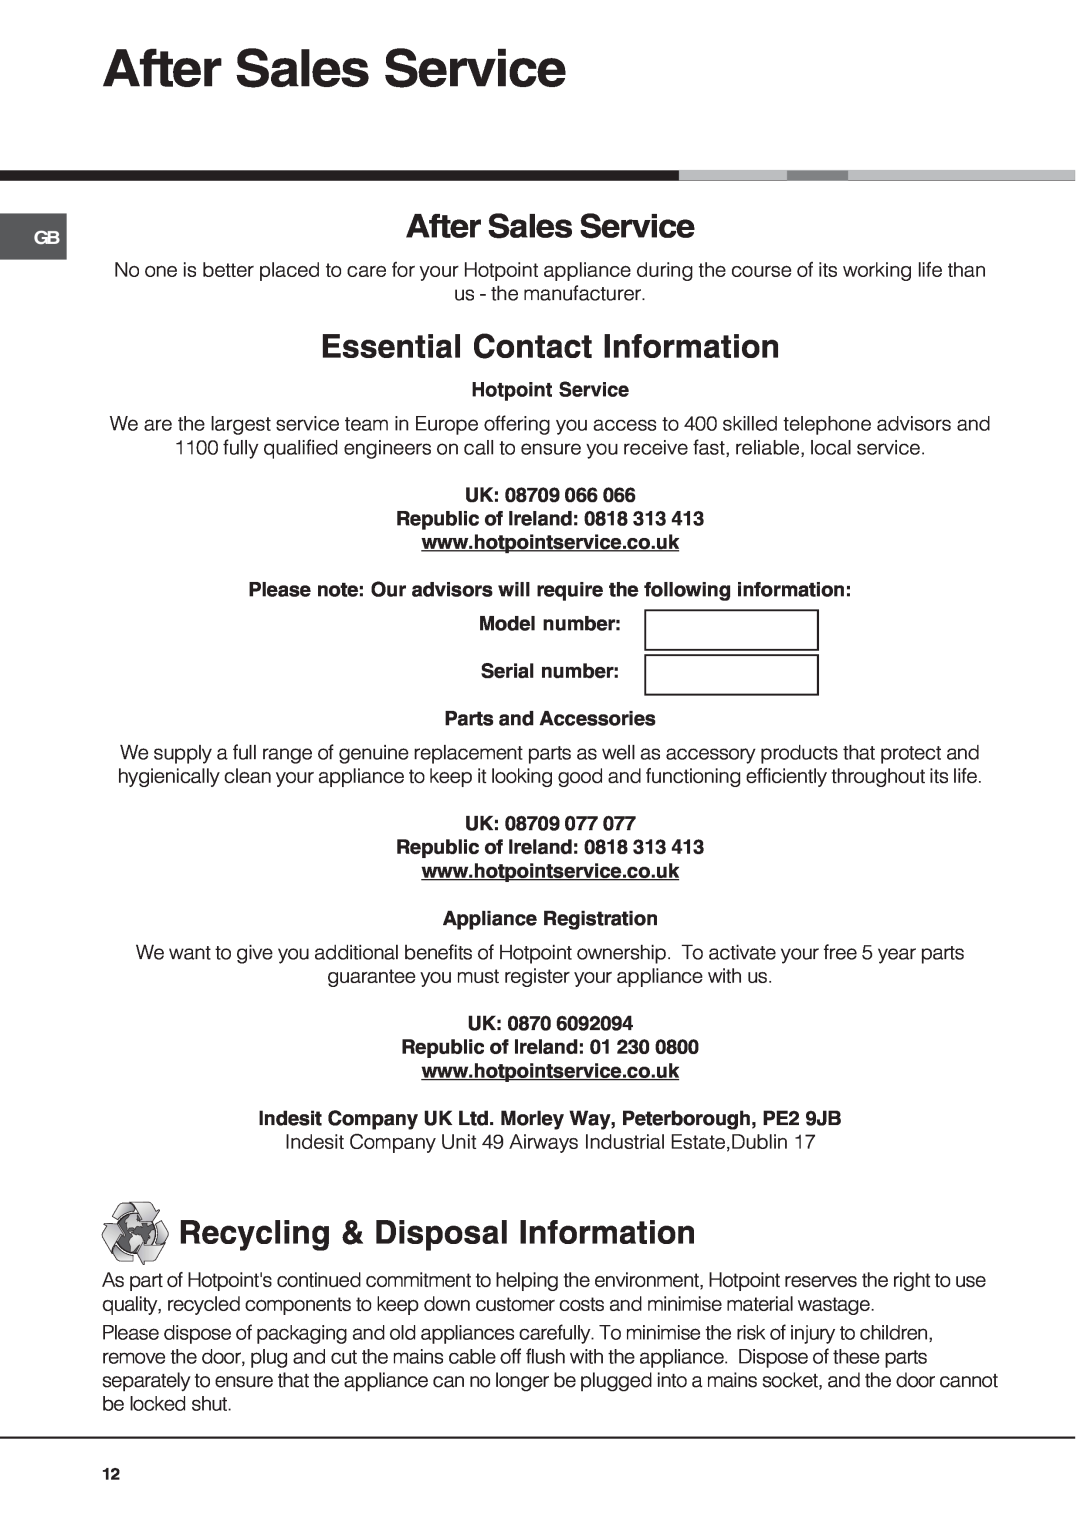 Hotpoint AHP69PGX manual After Sales Service, Essential Contact Information, Recycling & Disposal Information 